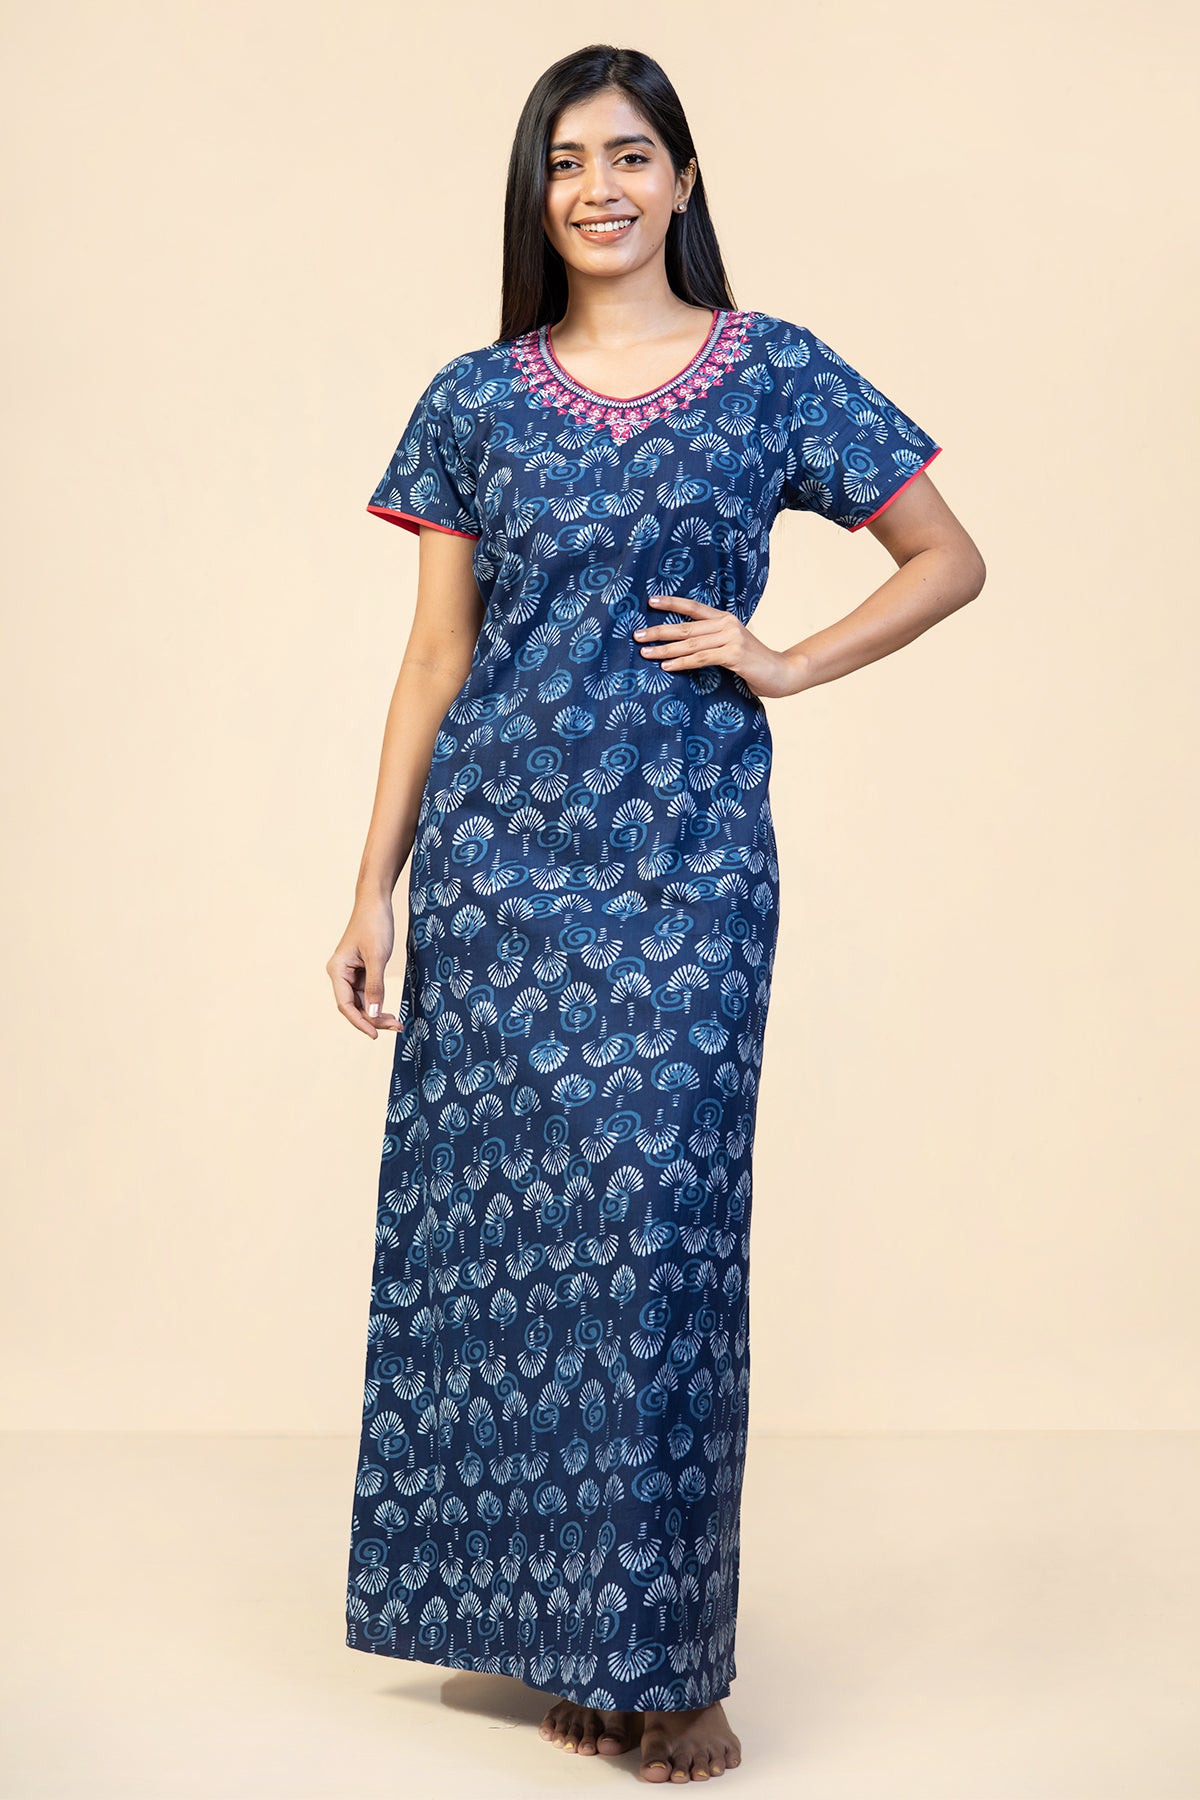 All Over Block Printed With Floral Embroidered Nighty - Blue